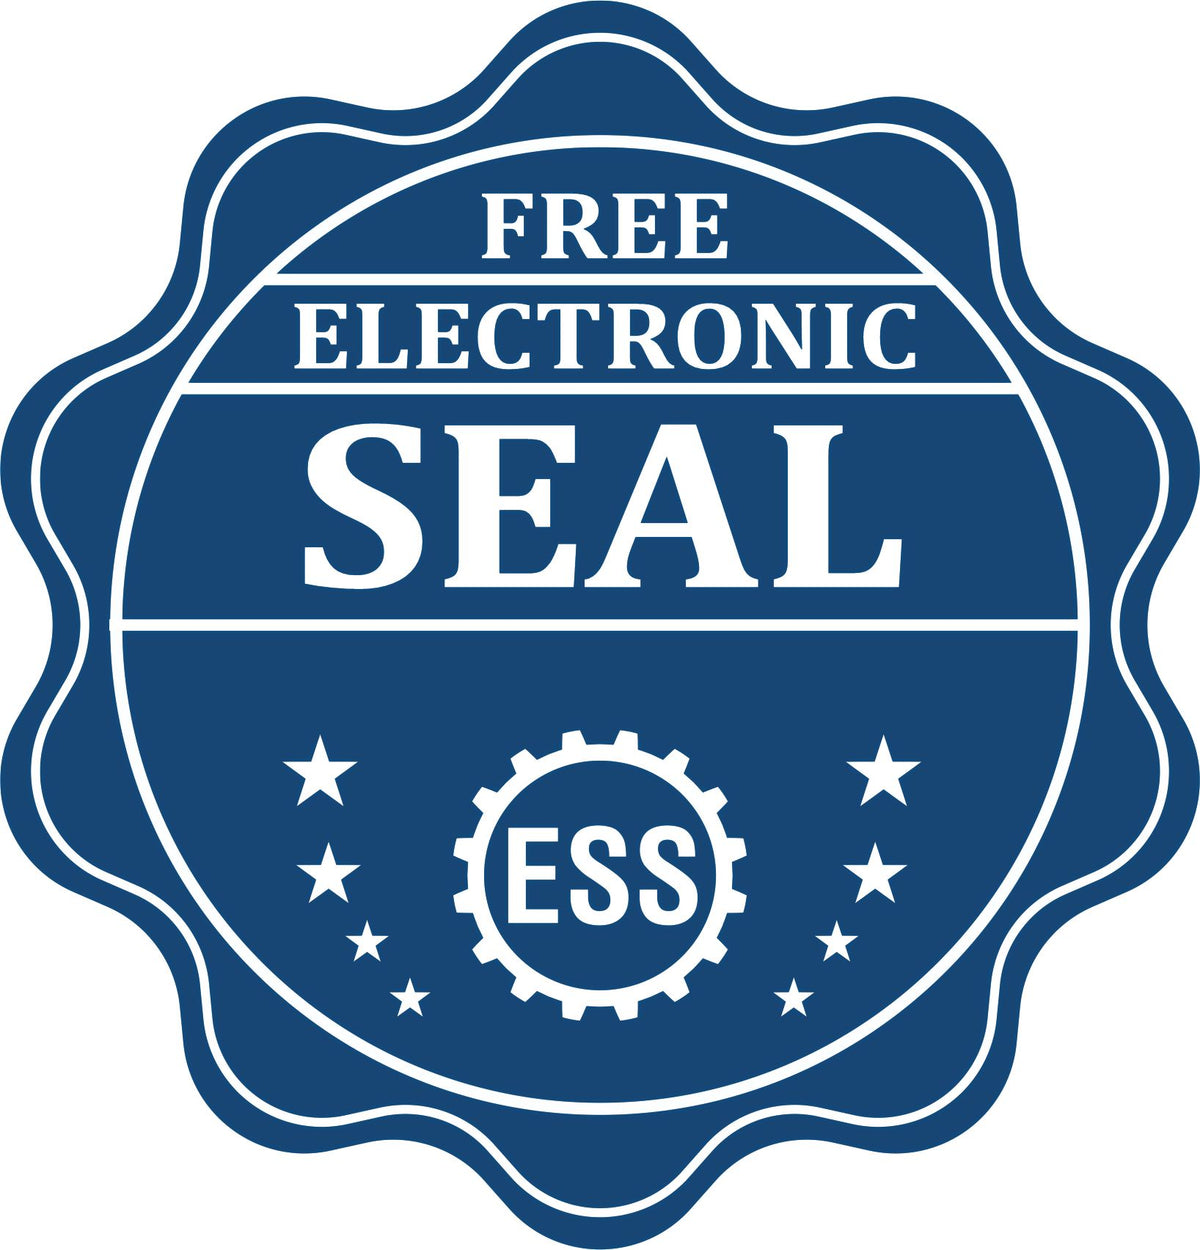 A badge showing a free electronic seal for the Heavy Duty Cast Iron Maryland Engineer Seal Embosser with stars and the ESS gear on the emblem.